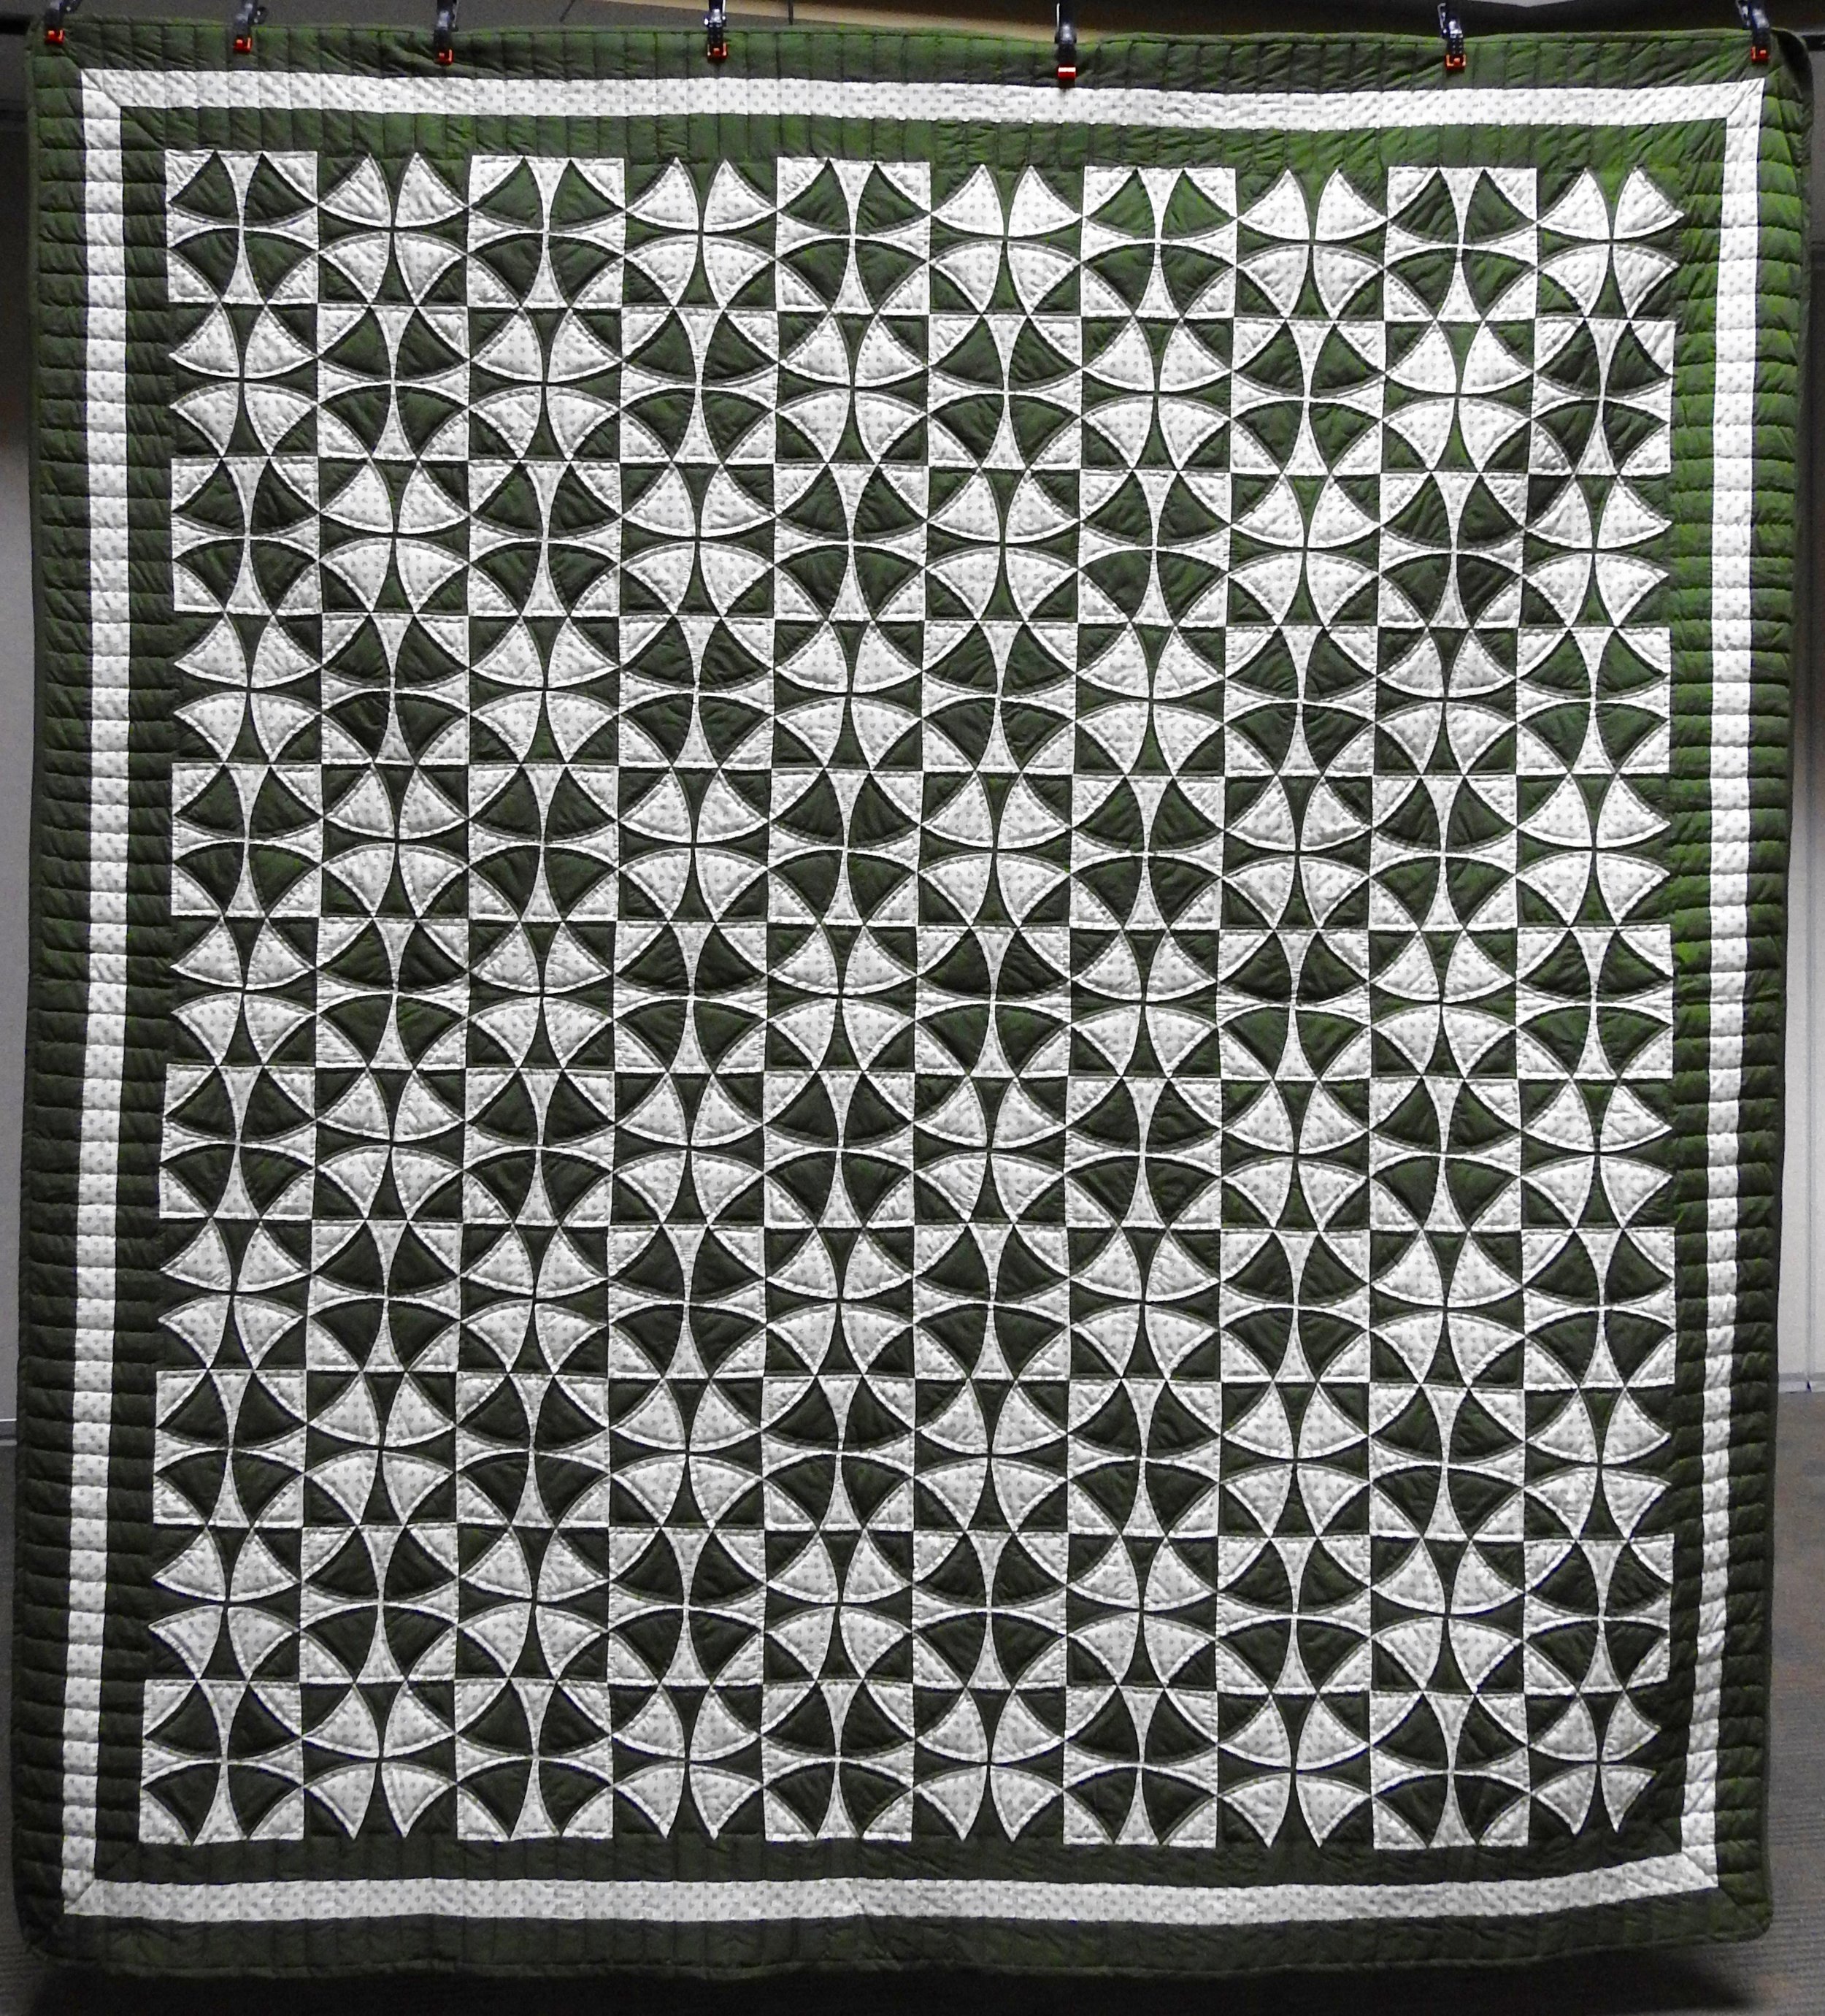  Wheel of Fortune, Pieced, Hand Quilted, 92 x 100”